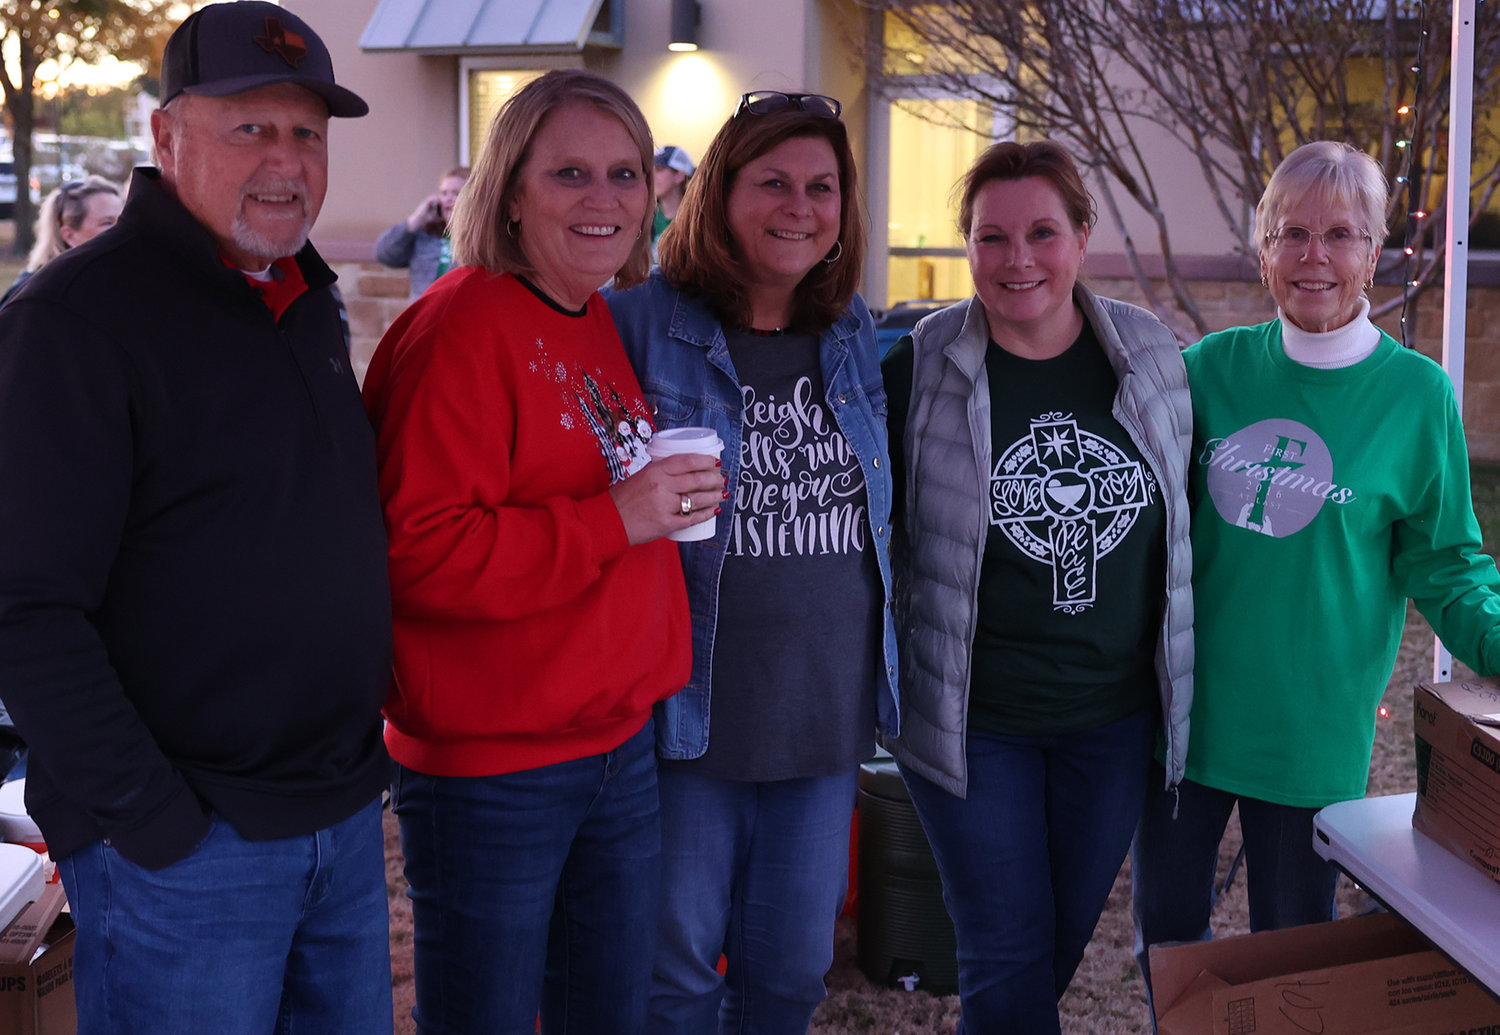 Members of First Baptist Church of Weatherford served hot chocolate. Shown are (from left) Dale Reed, Mary Beth Reed, Holly Branch, Hylda Nugent, and Debbie Pipes.